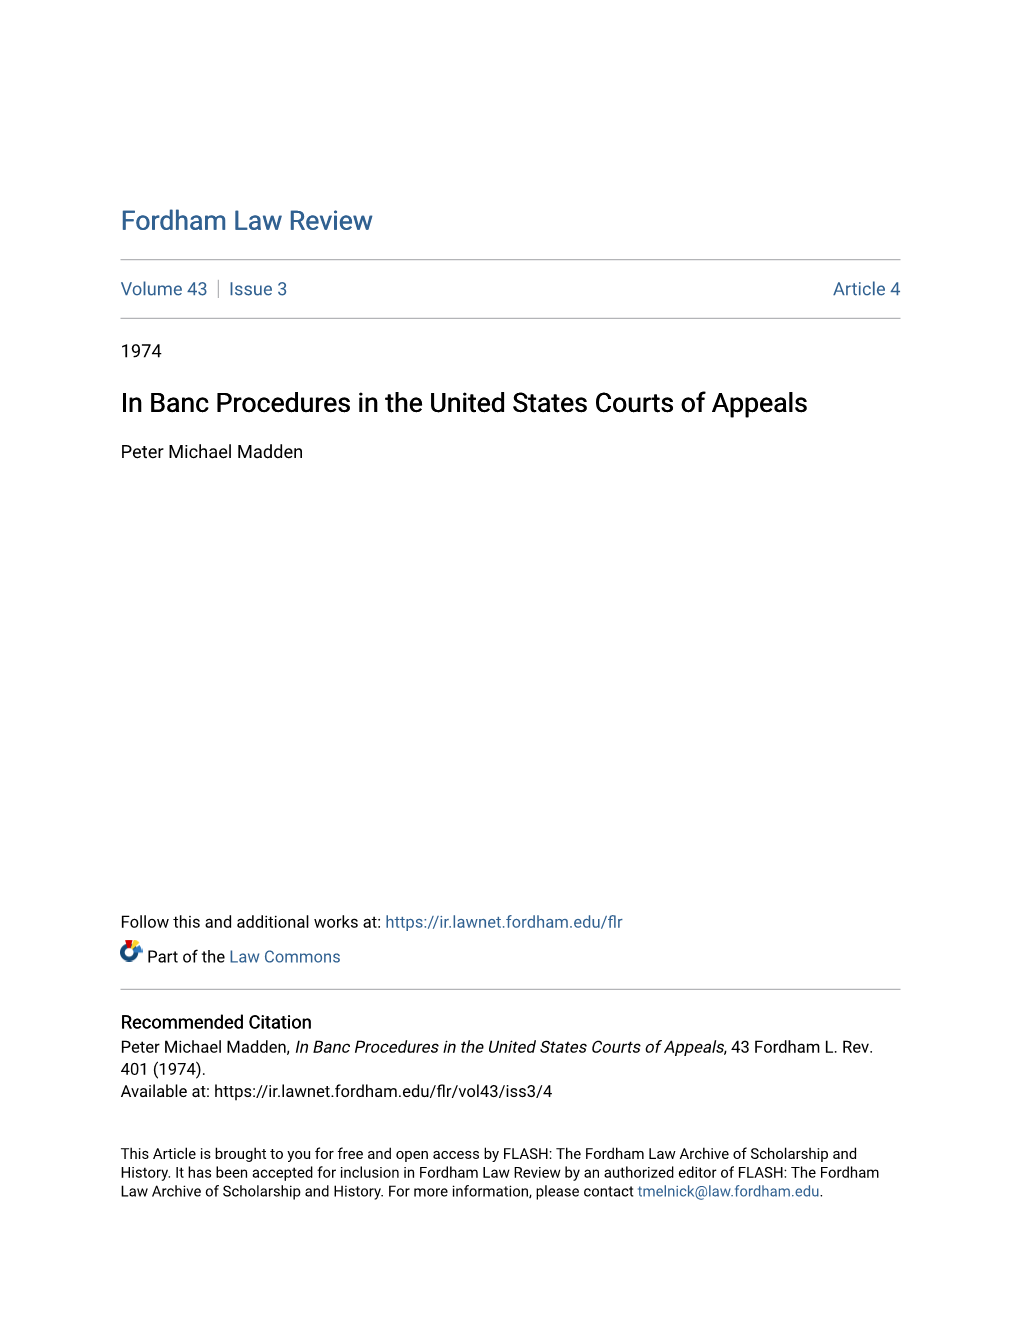 In Banc Procedures in the United States Courts of Appeals